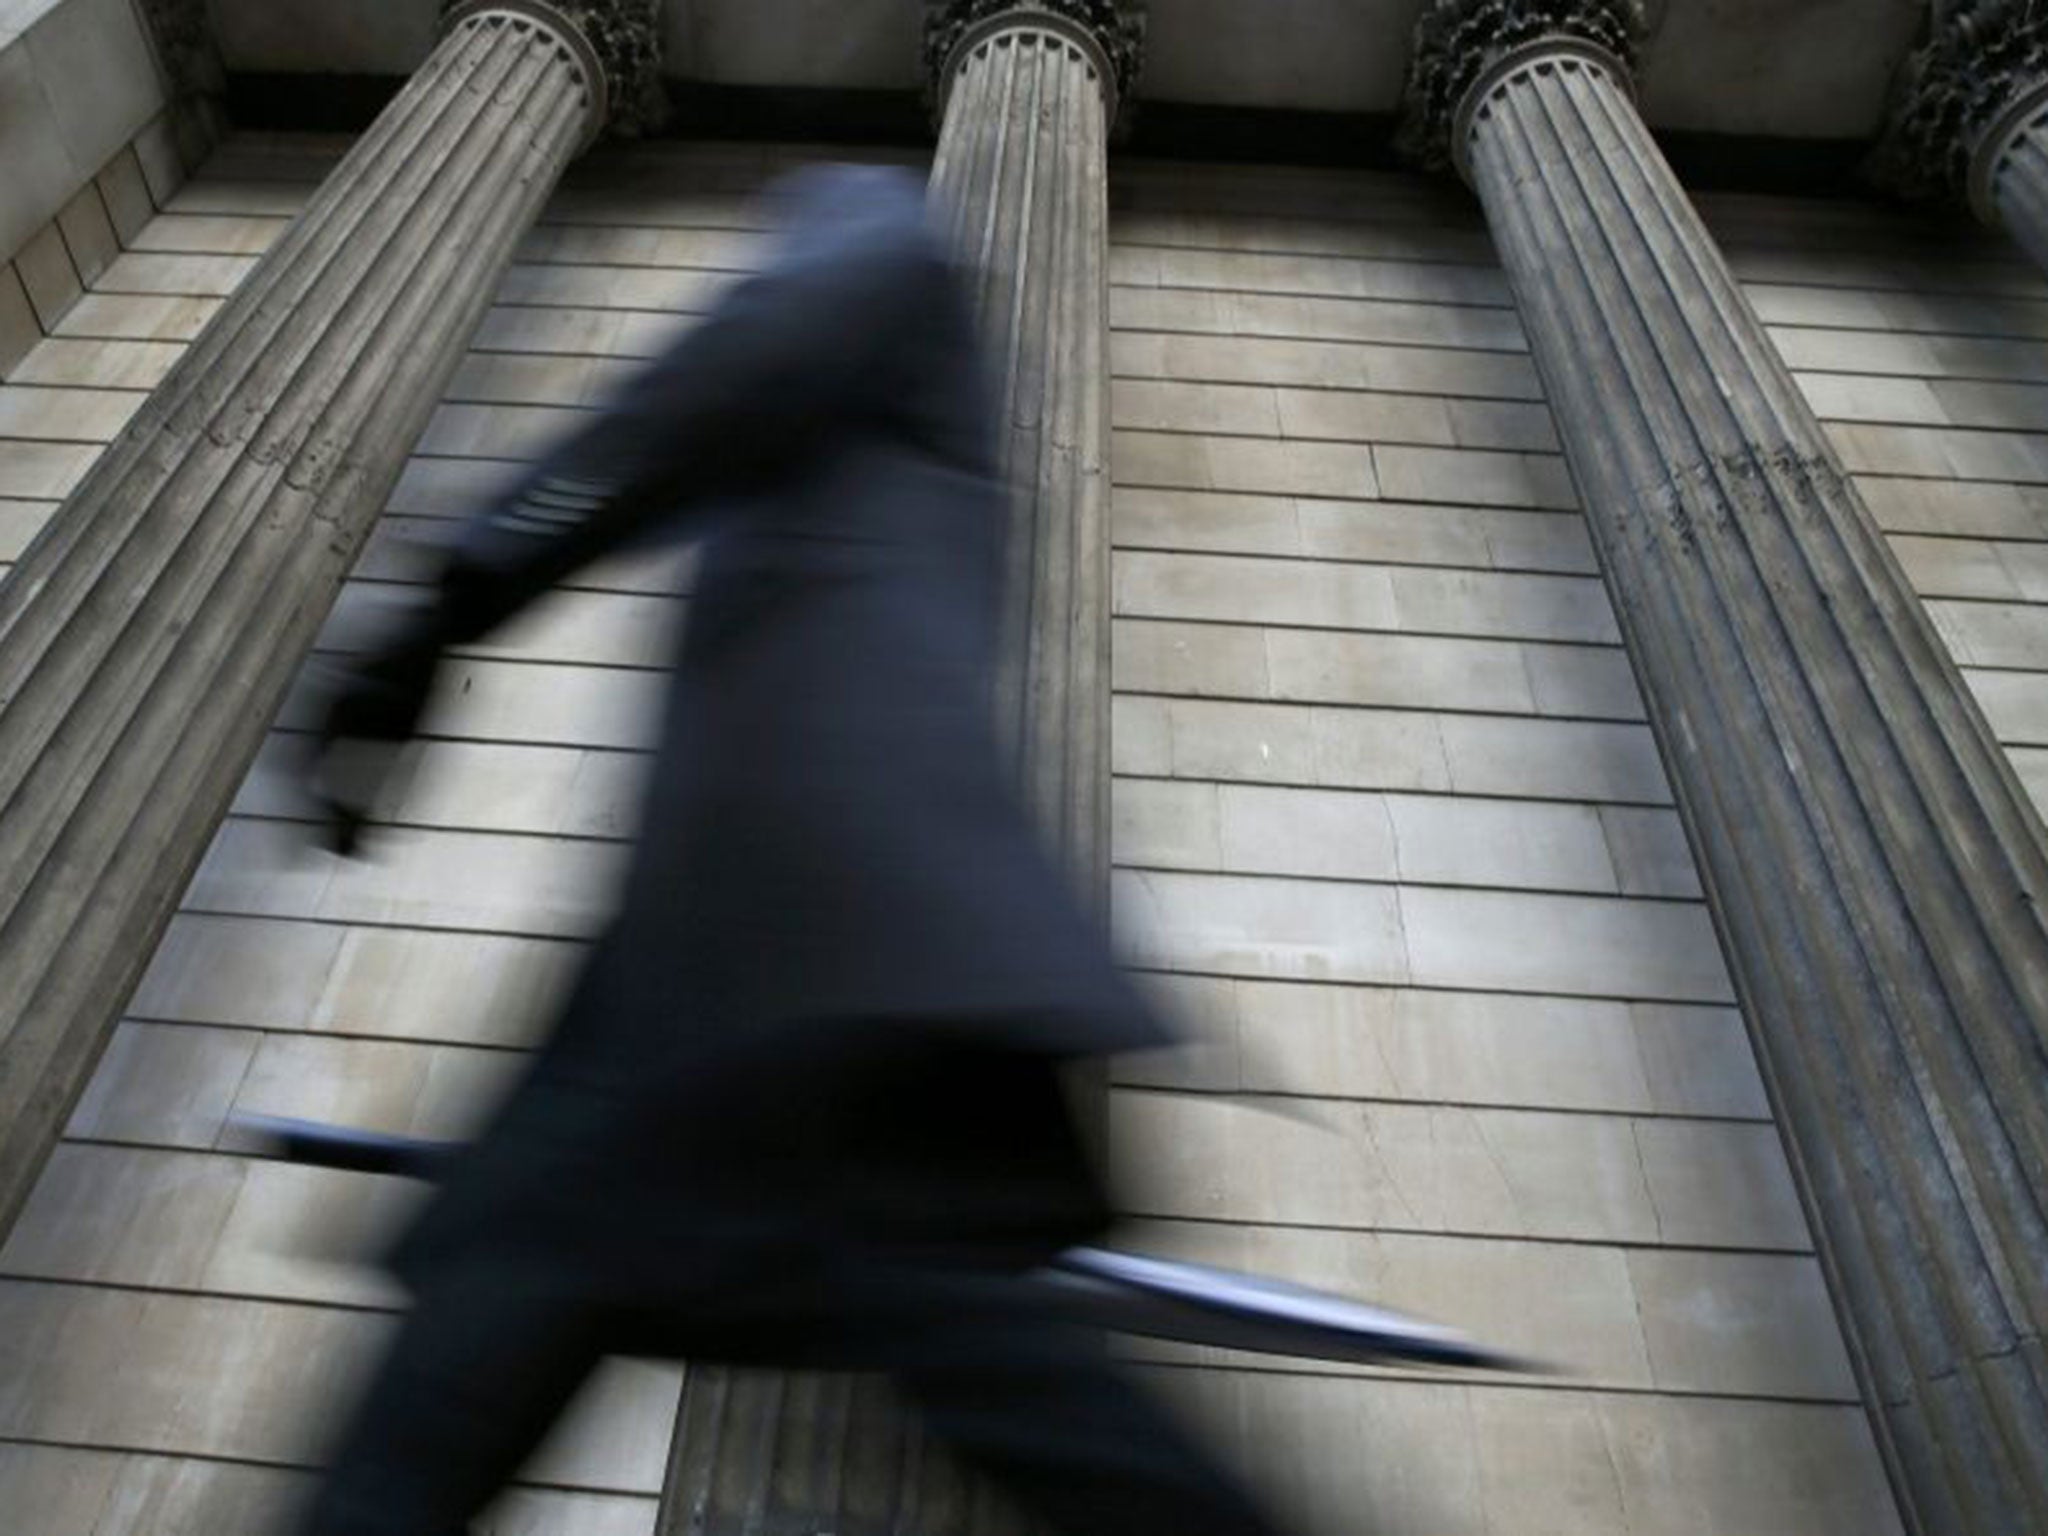 The FCA has imposed £1.1bn in fines on five banks over forex trading practices